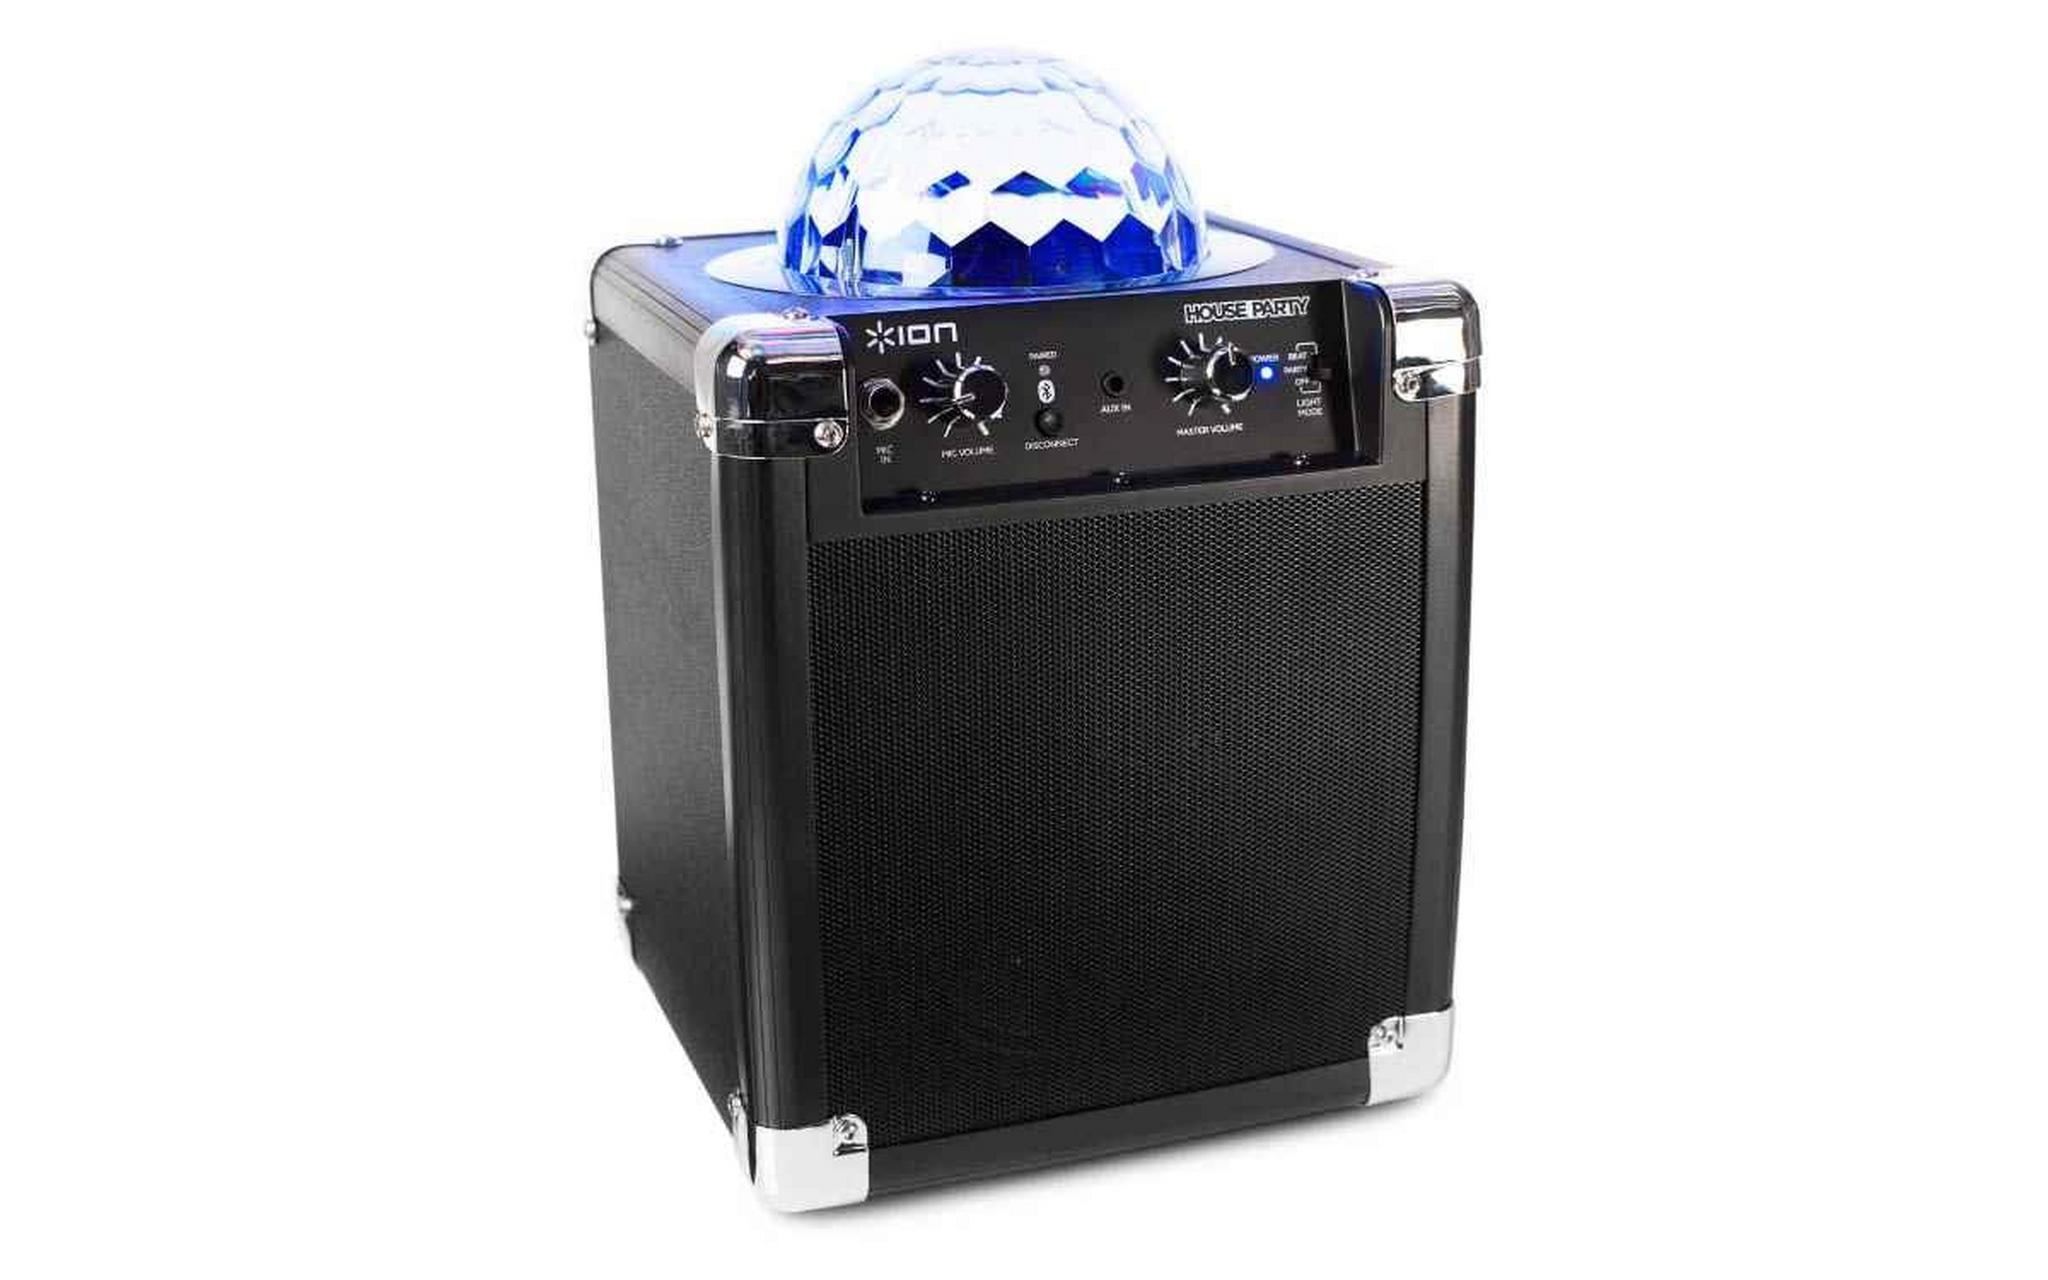 Ion House Party Portable Bluetooth Speaker with Party Lights - Black